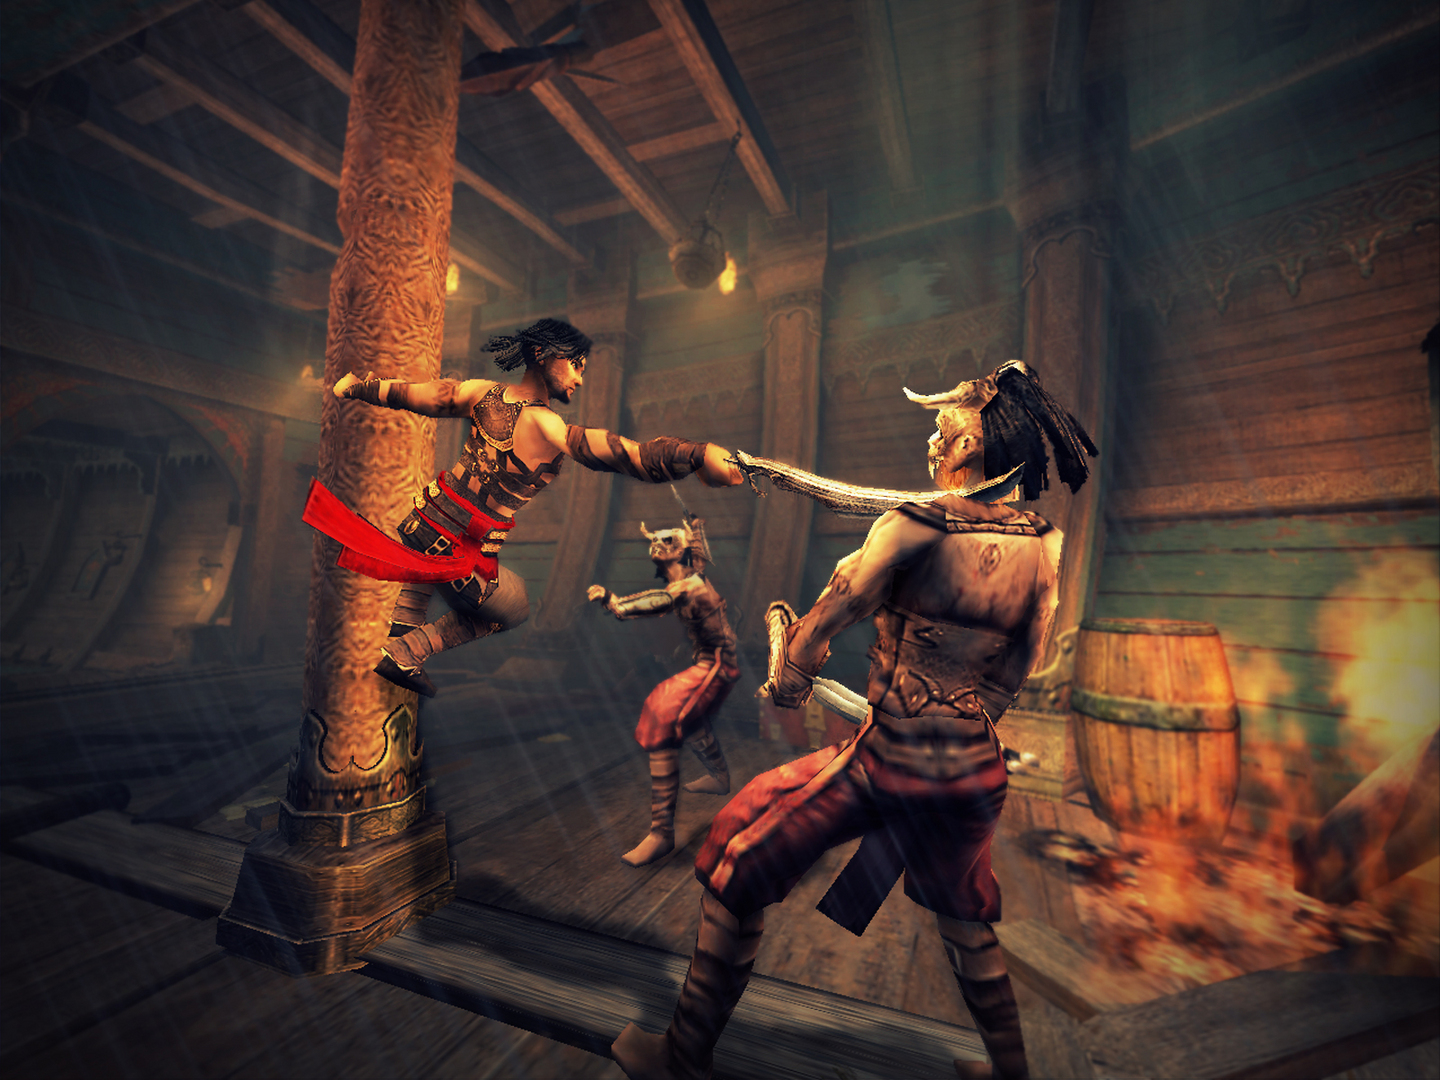 Buy Prince of Persia Warrior Within®